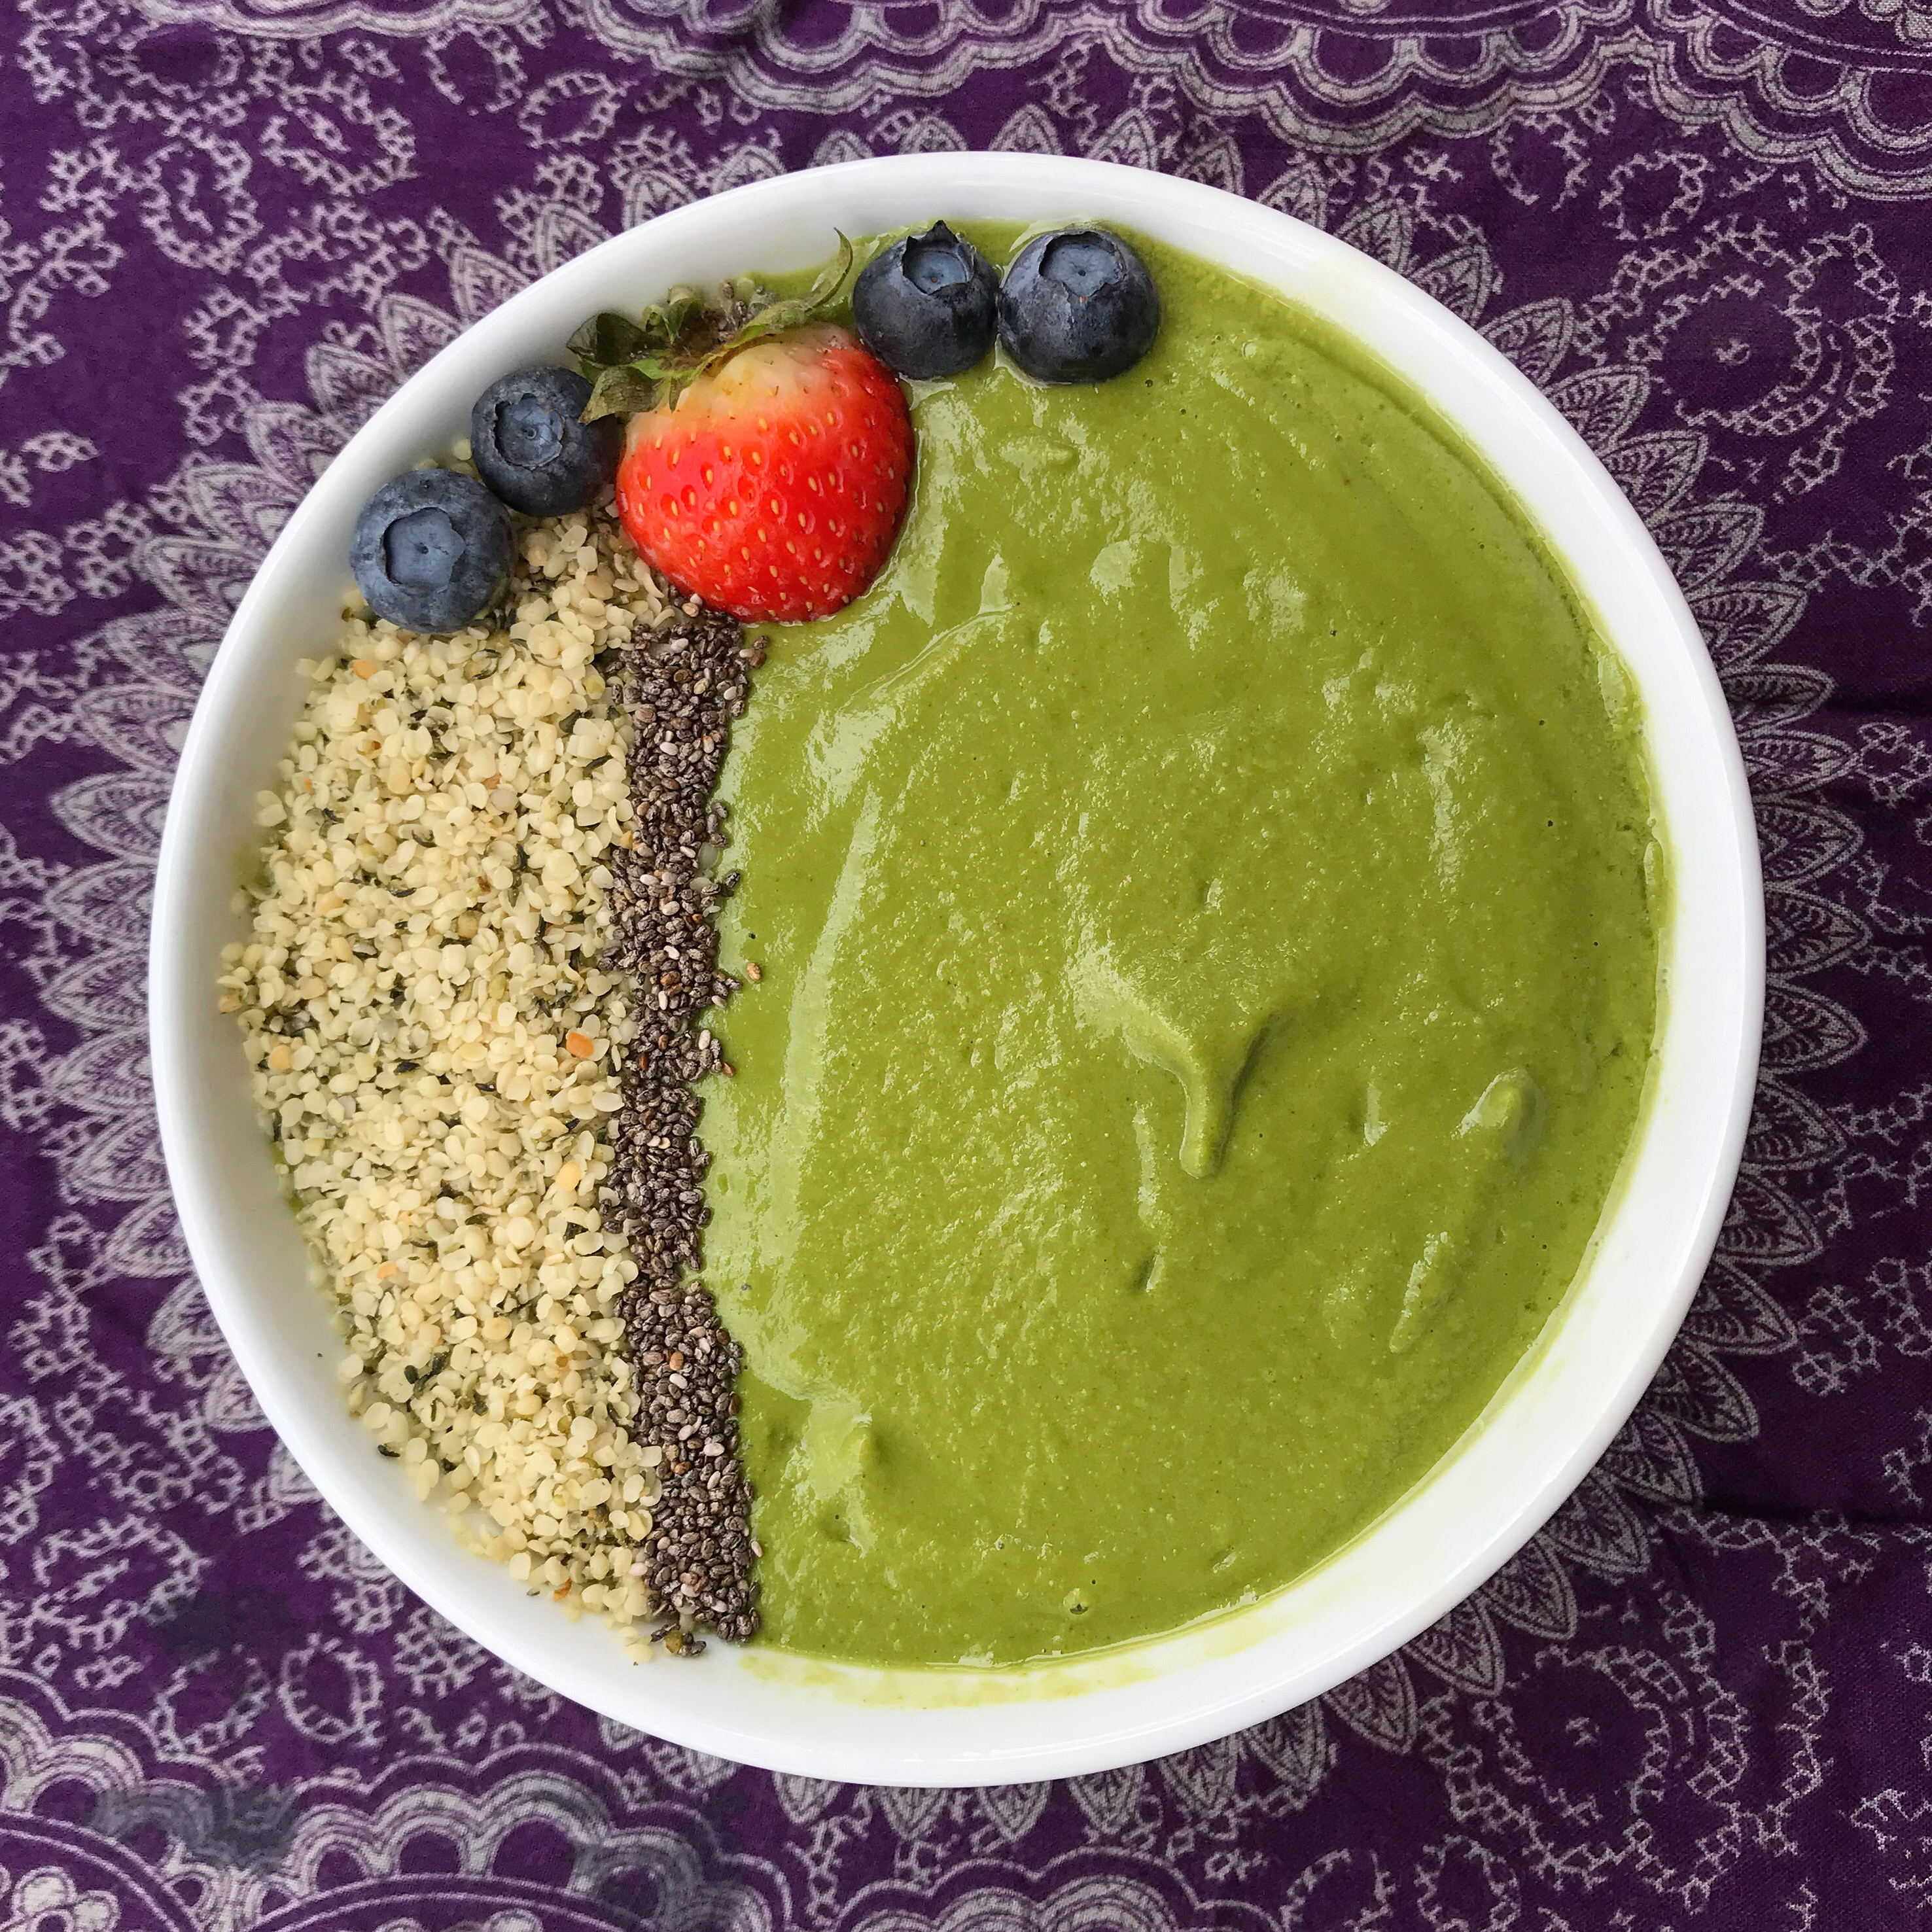 A green smoothie with arranged hemp and chia seeds, plus a strawberry and 4 blueberries as garnish.